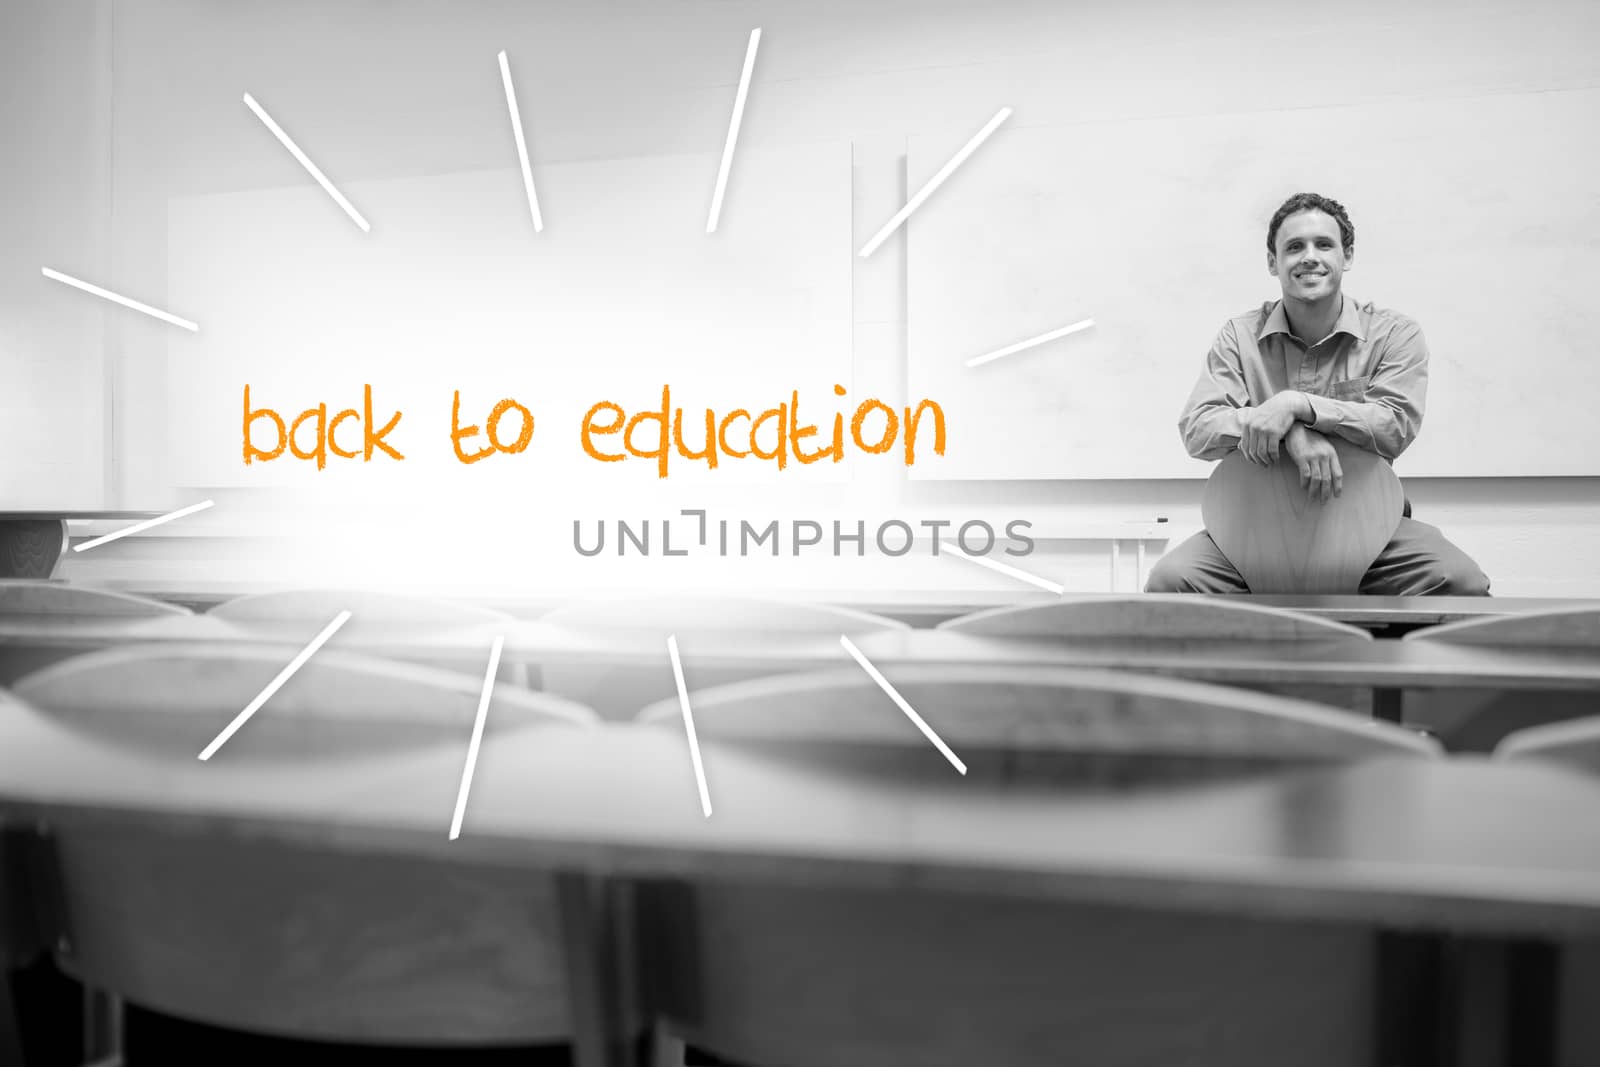 Back to education against lecturer sitting in lecture hall by Wavebreakmedia